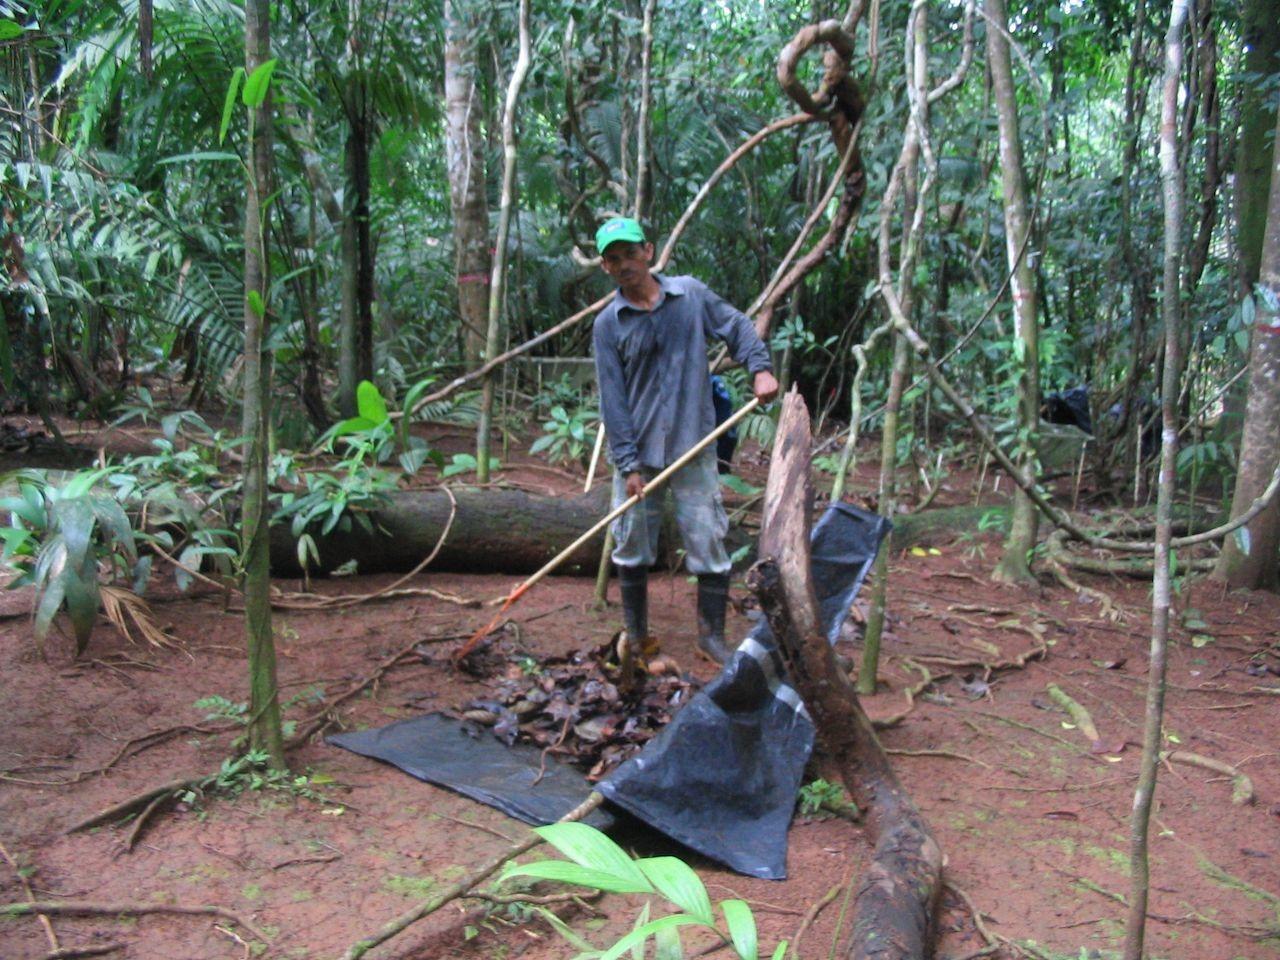 Francisco Valdez (the hero of the project) raking litter in the experimental plots in a lowland tropical forest in Panama.